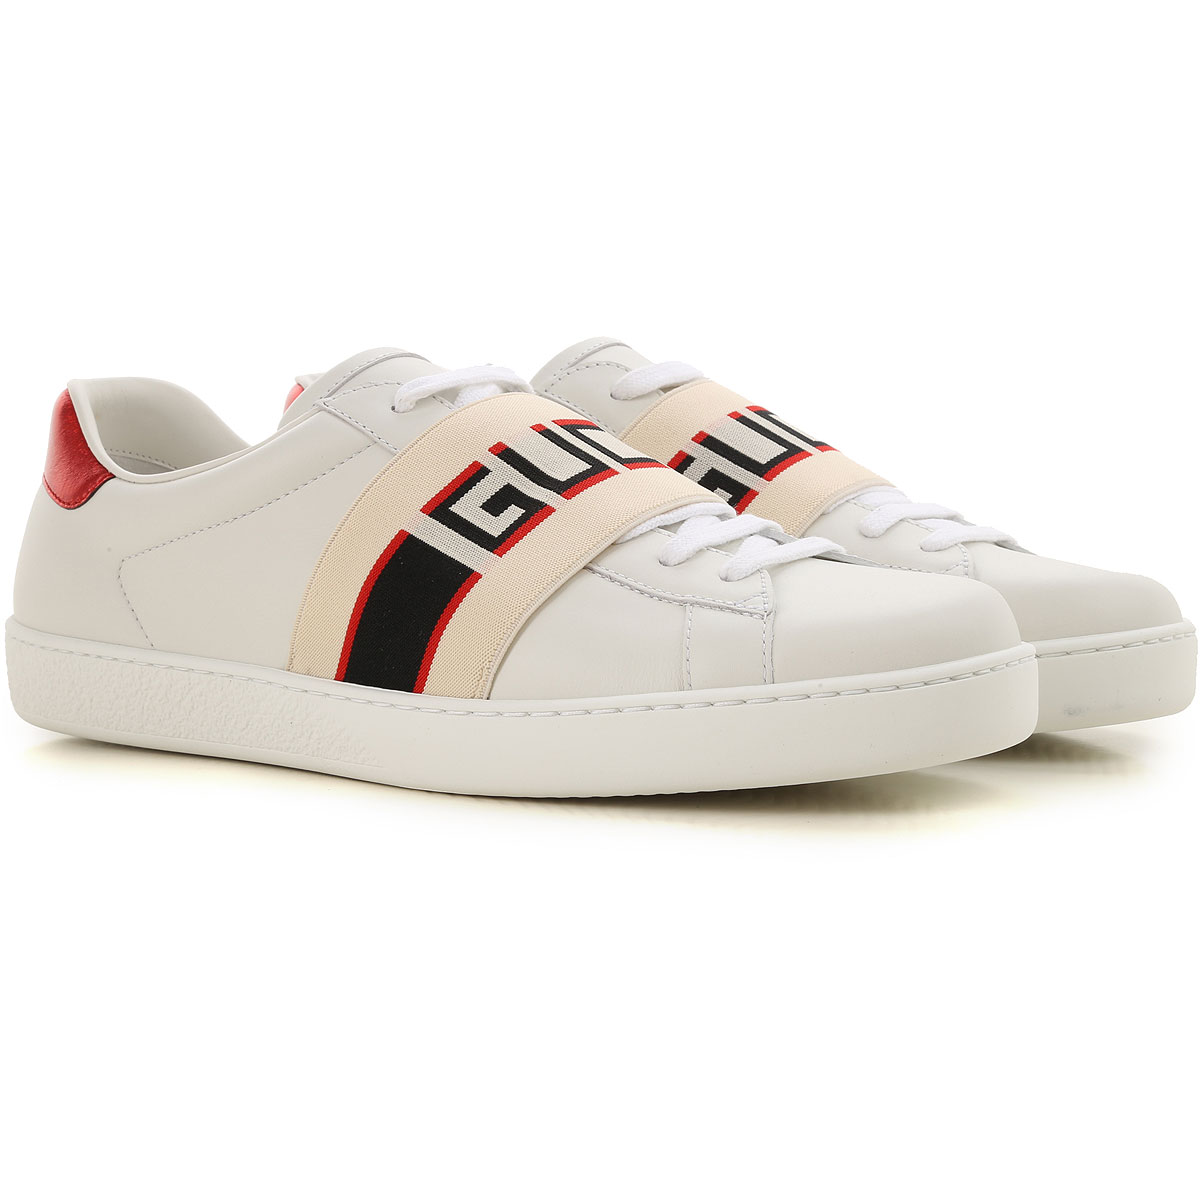 Mens Shoes Gucci, Style code: 523469-0fiv0-9091